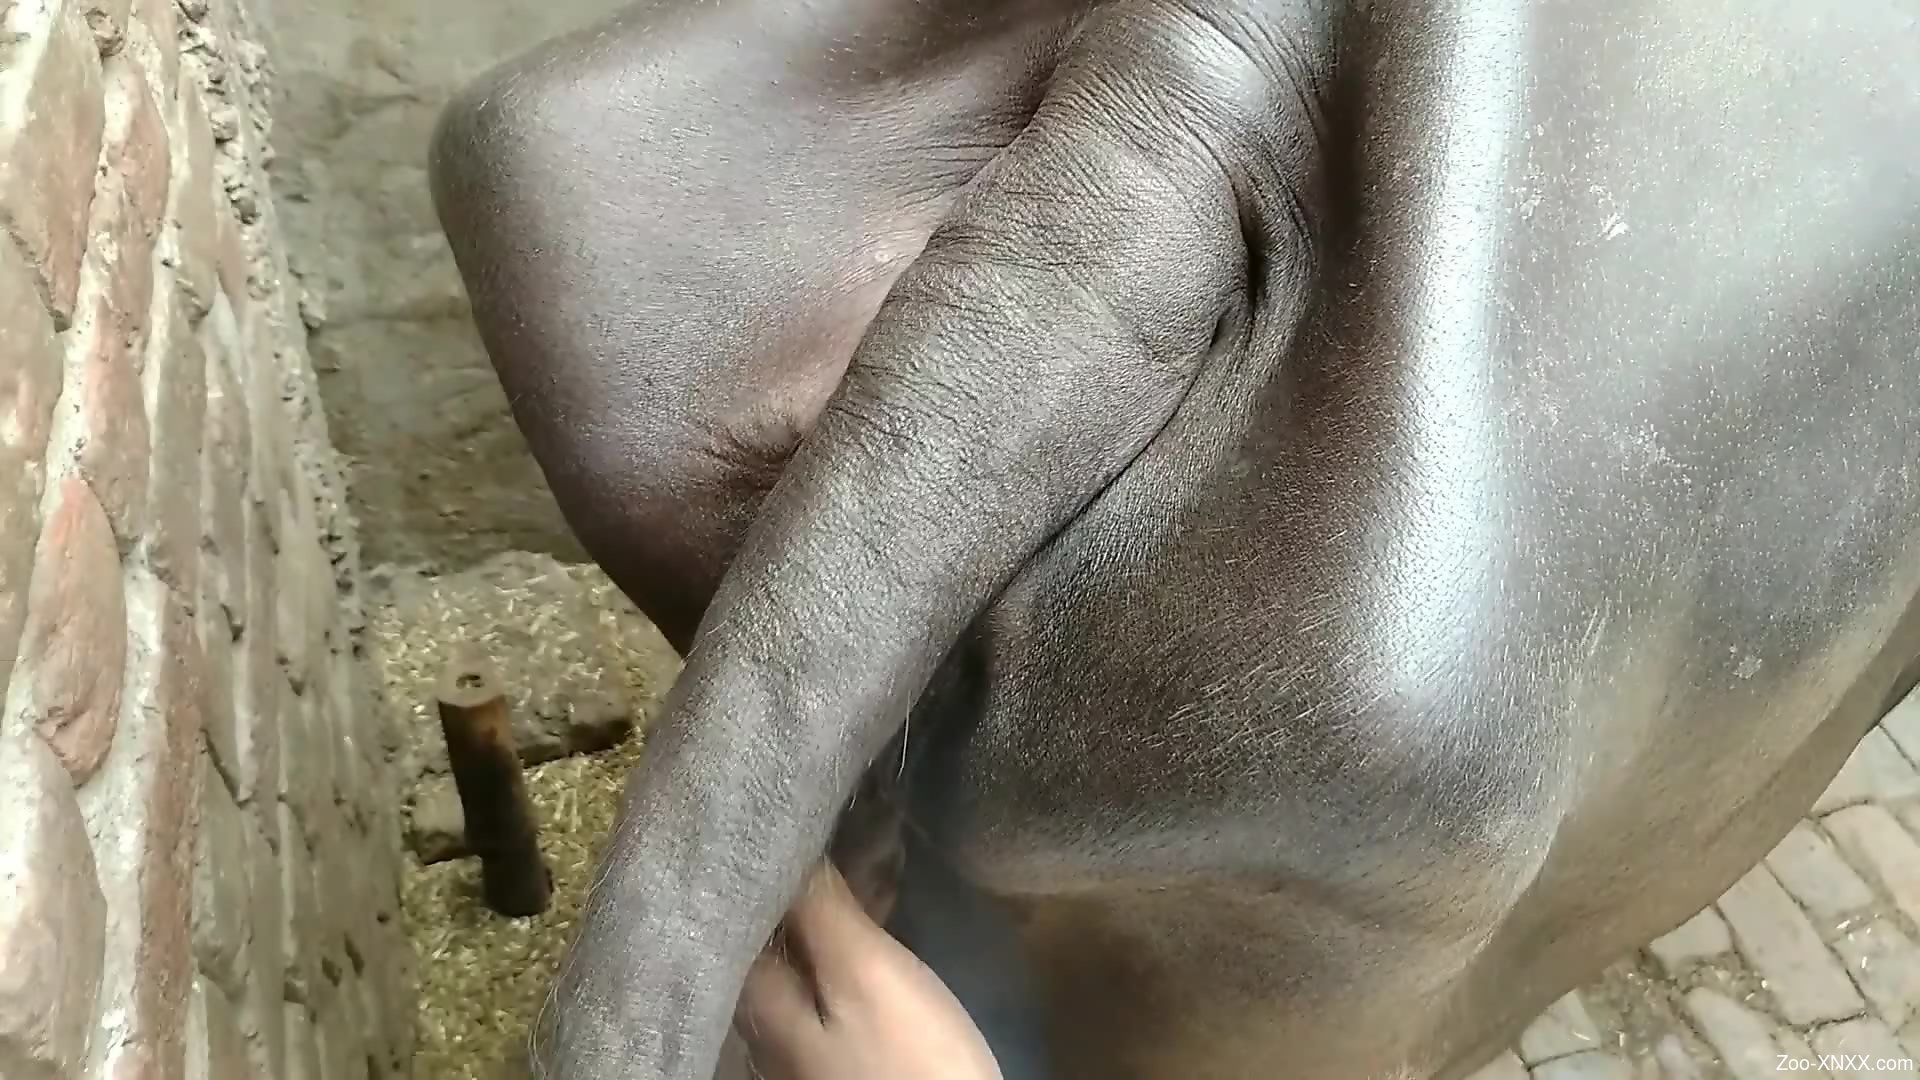 Xnxx2cow - Man wants to fuck this cow's pussy in such a hard mode